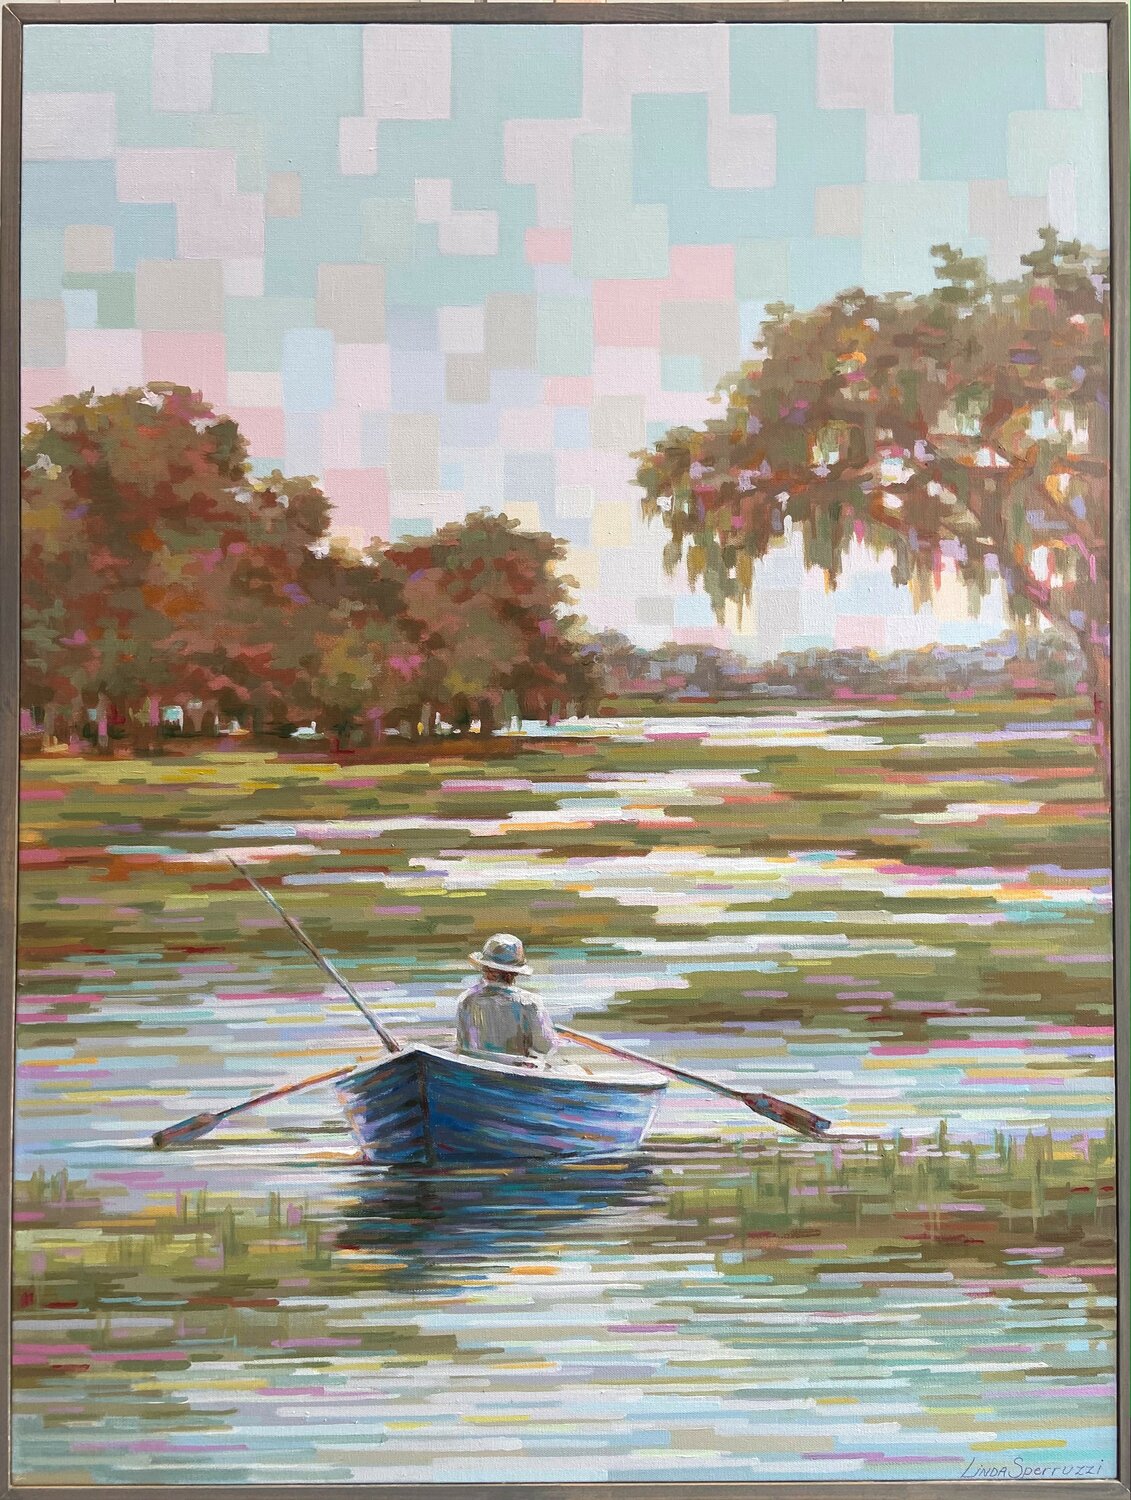 "Quiet Time On The River" by Linda Sperruzzi.